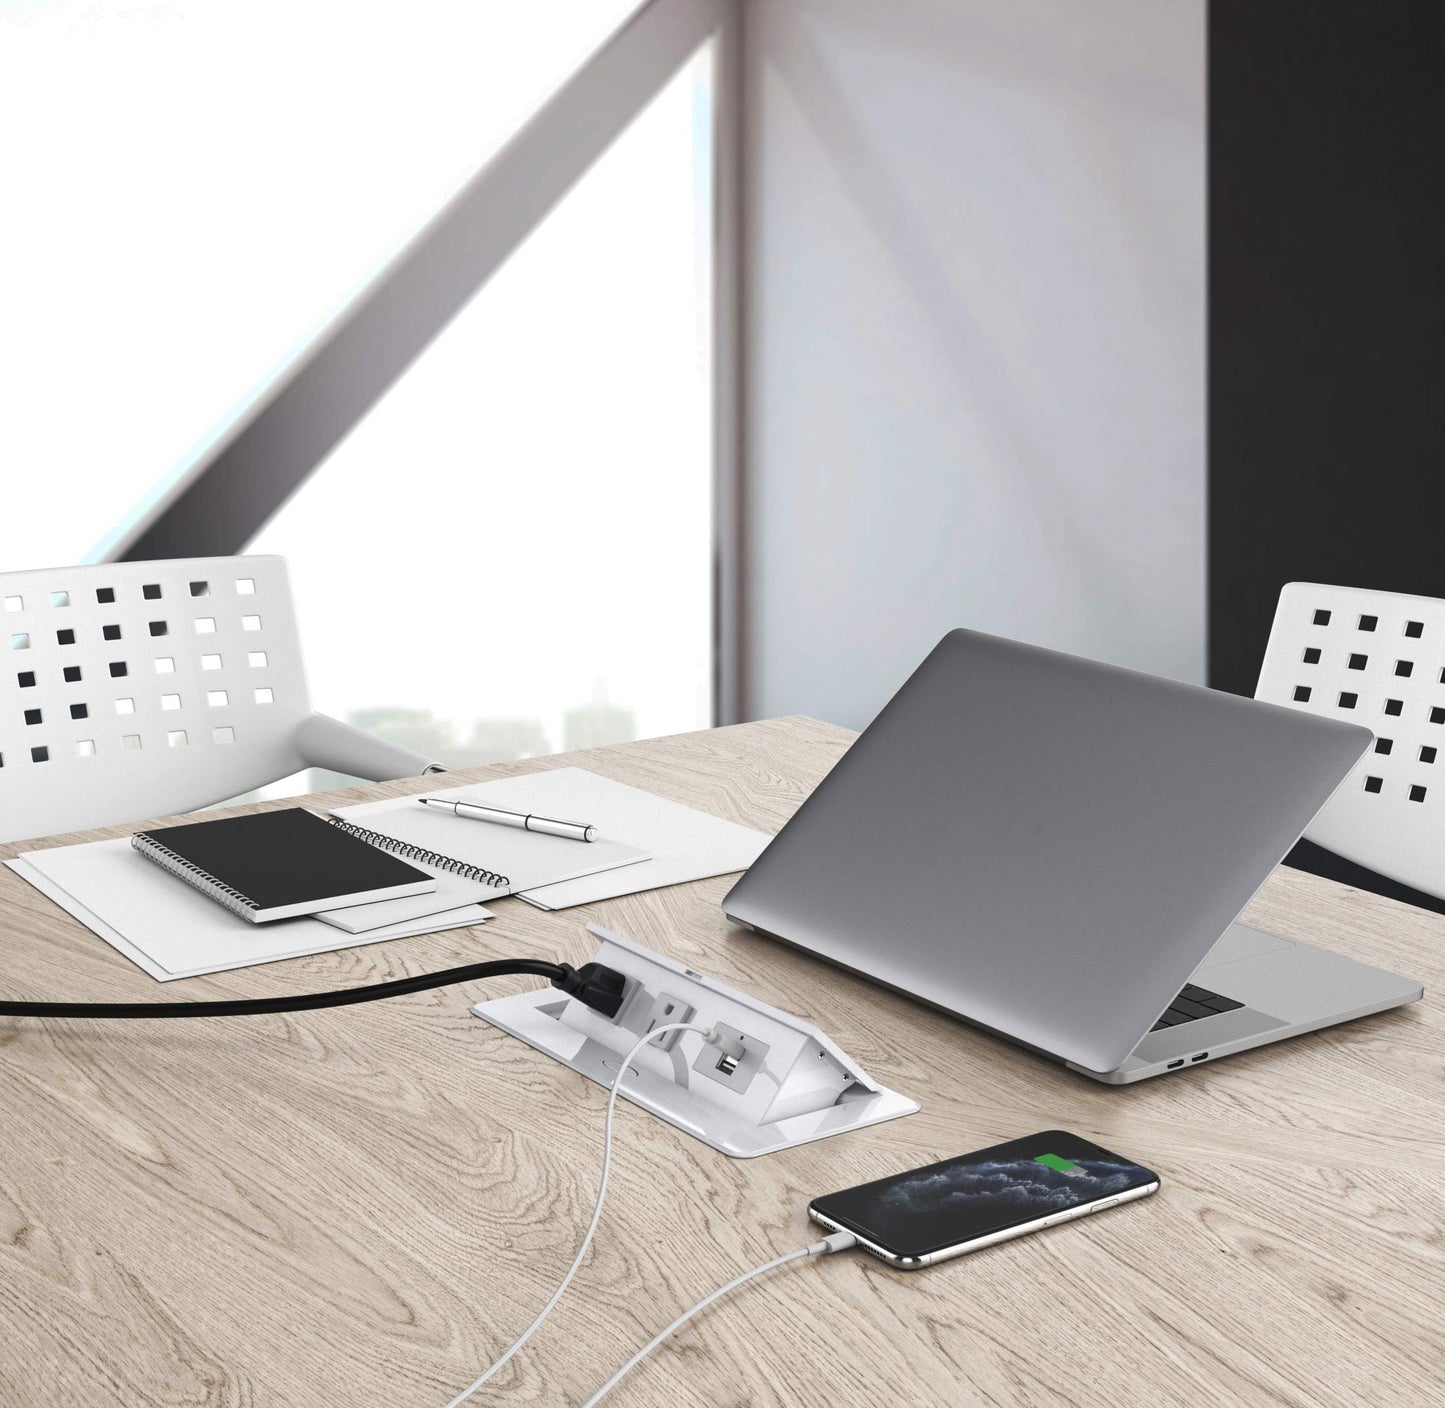 Pop Up Power Cover Box Desktop Socket with Dual USB Charging Ports